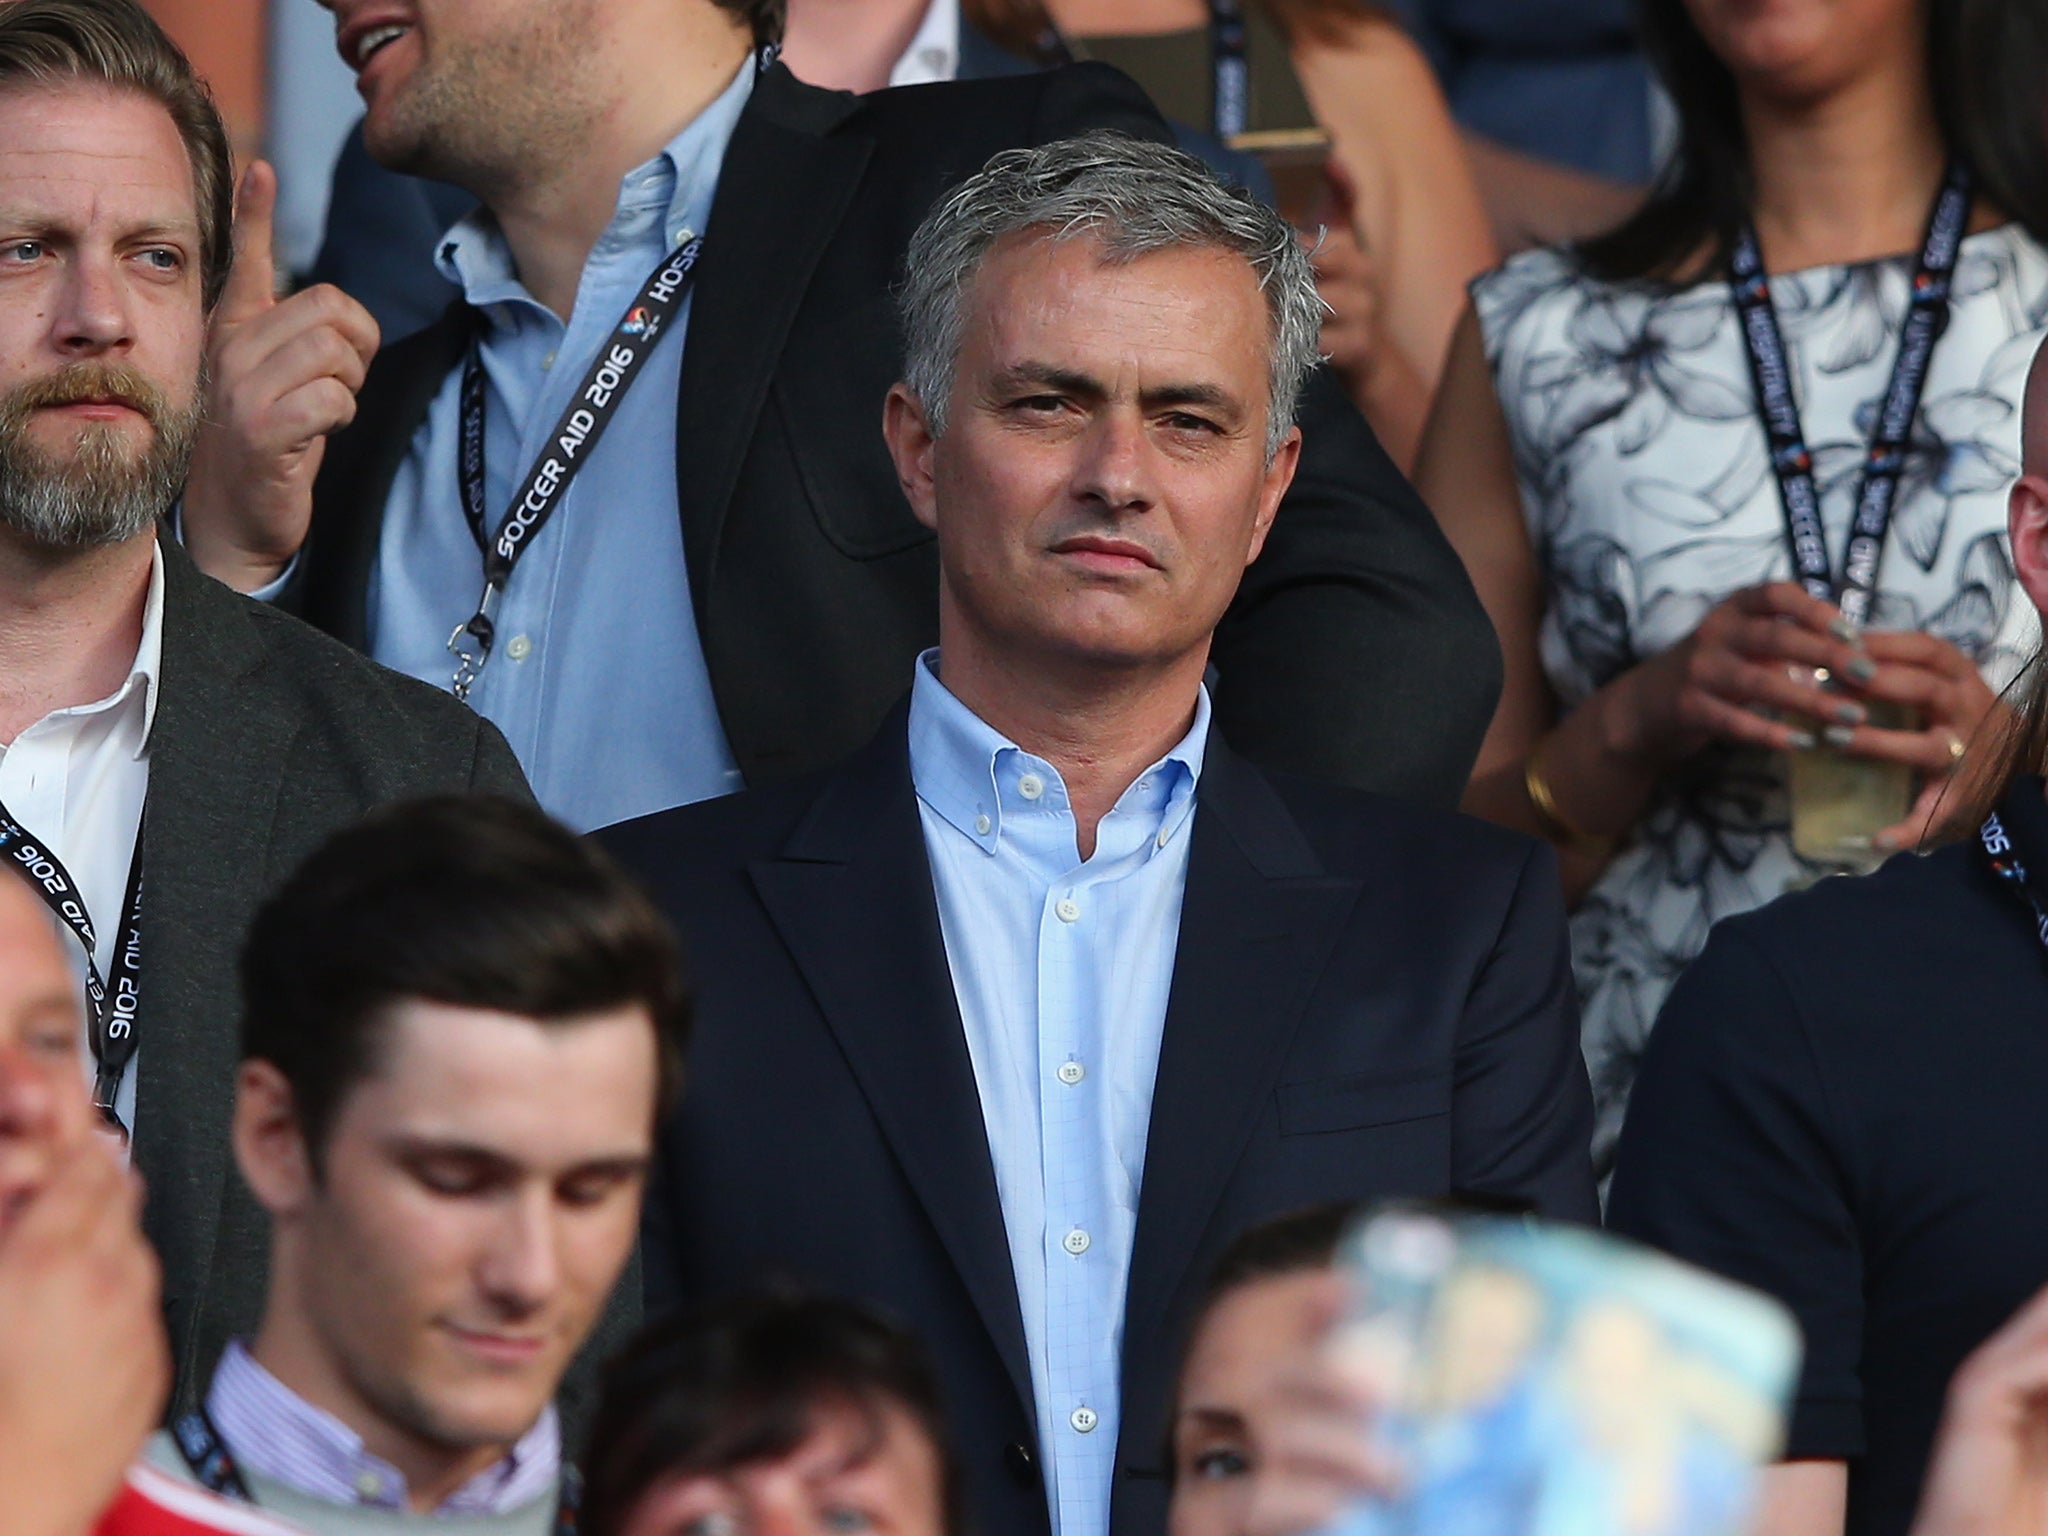 Mourinho is expected to give evidence at some stage of proceedings